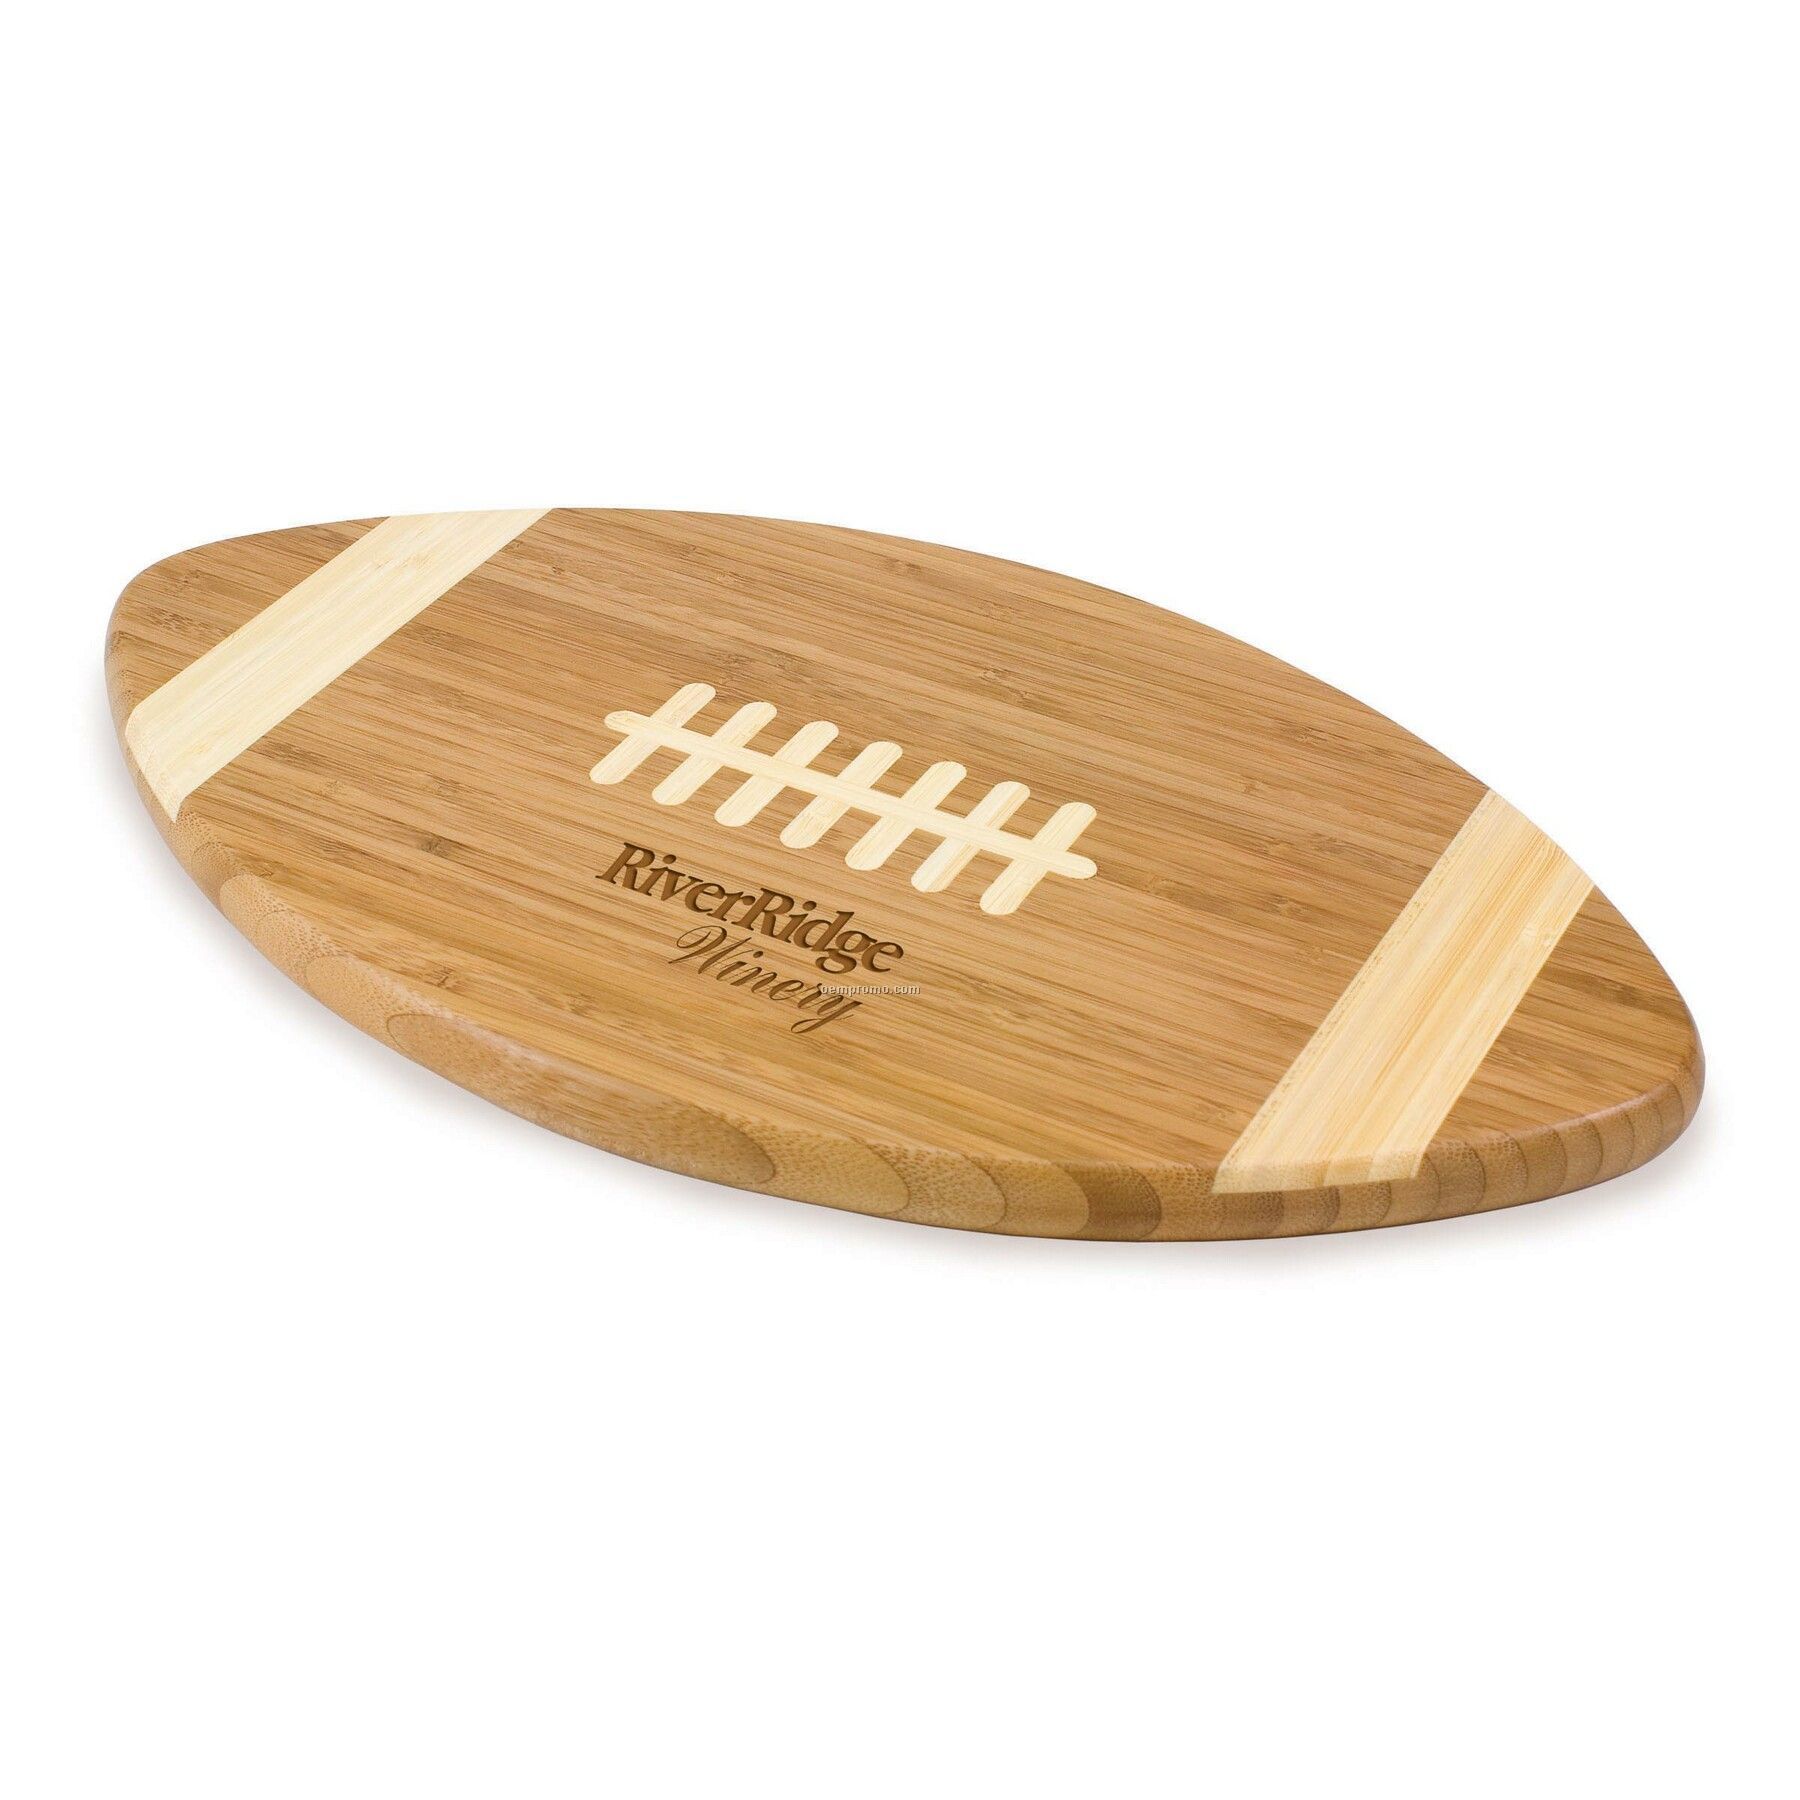 Touchdown Football Shaped Bamboo Cutting Board / Serving Tray